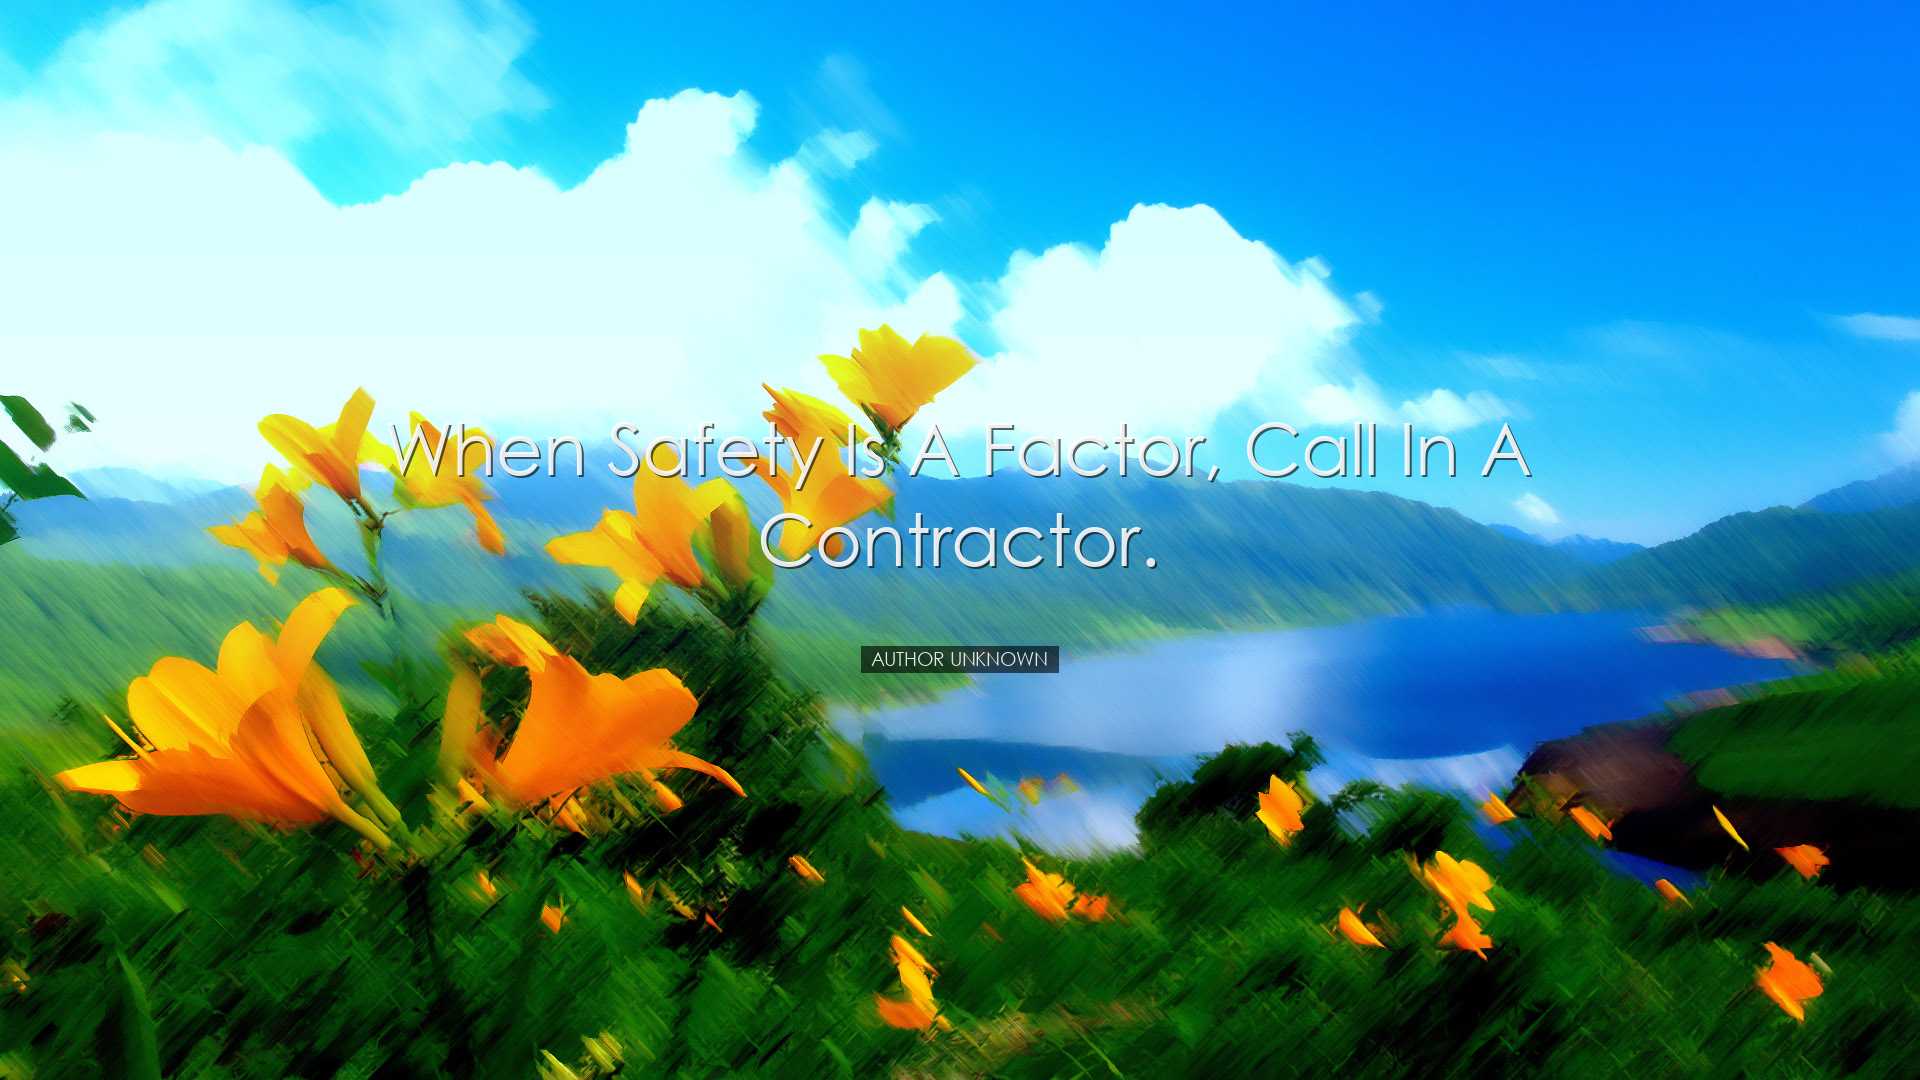 When safety is a factor, call in a contractor. - Author unknown